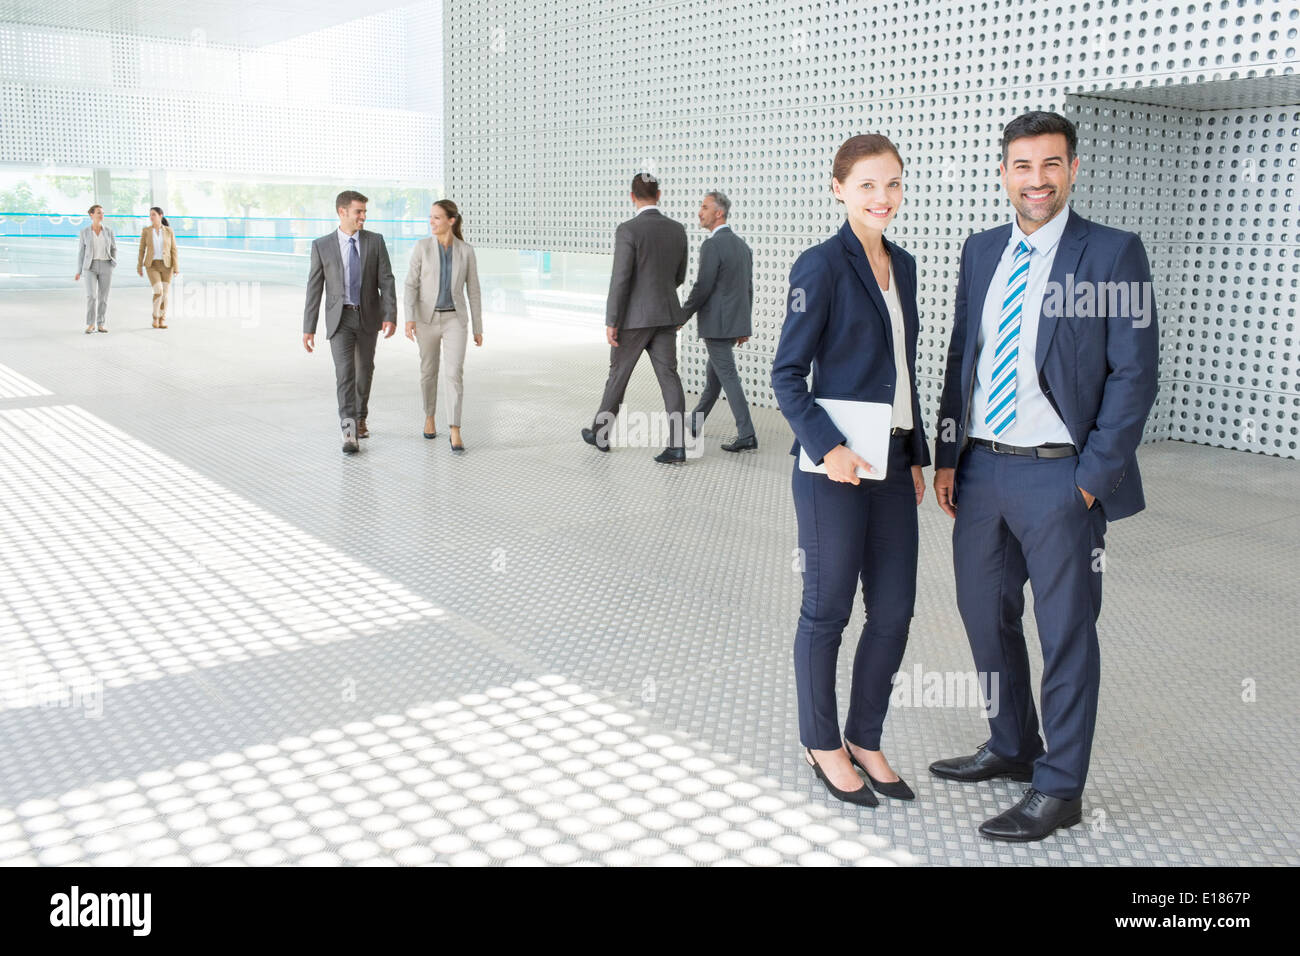 Portrait of business people outside modern building Stock Photo